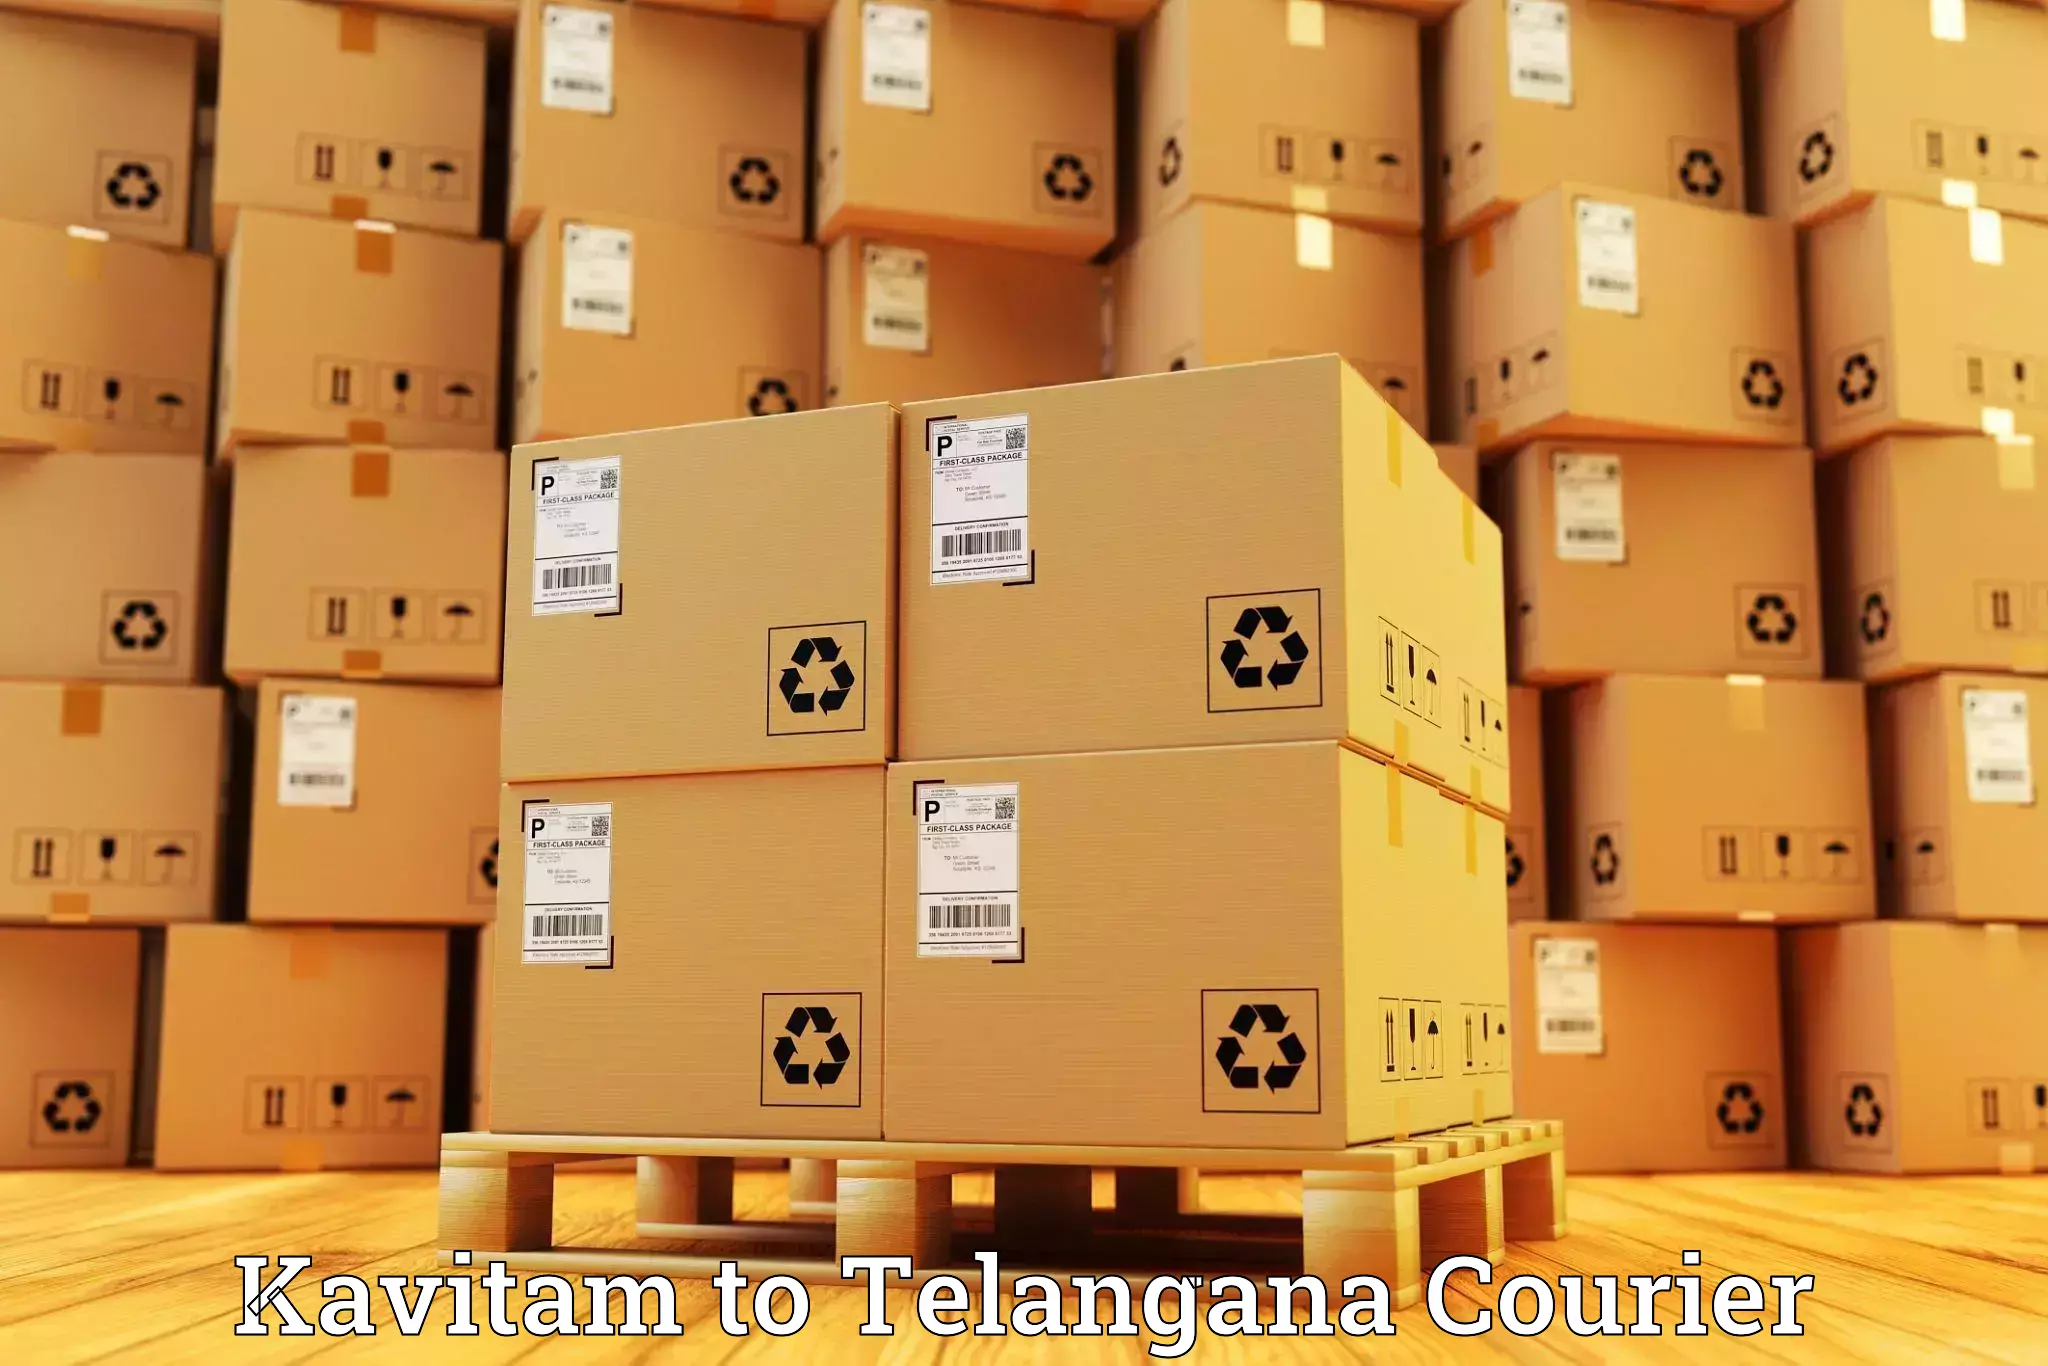 Comprehensive shipping network Kavitam to Hyderabad